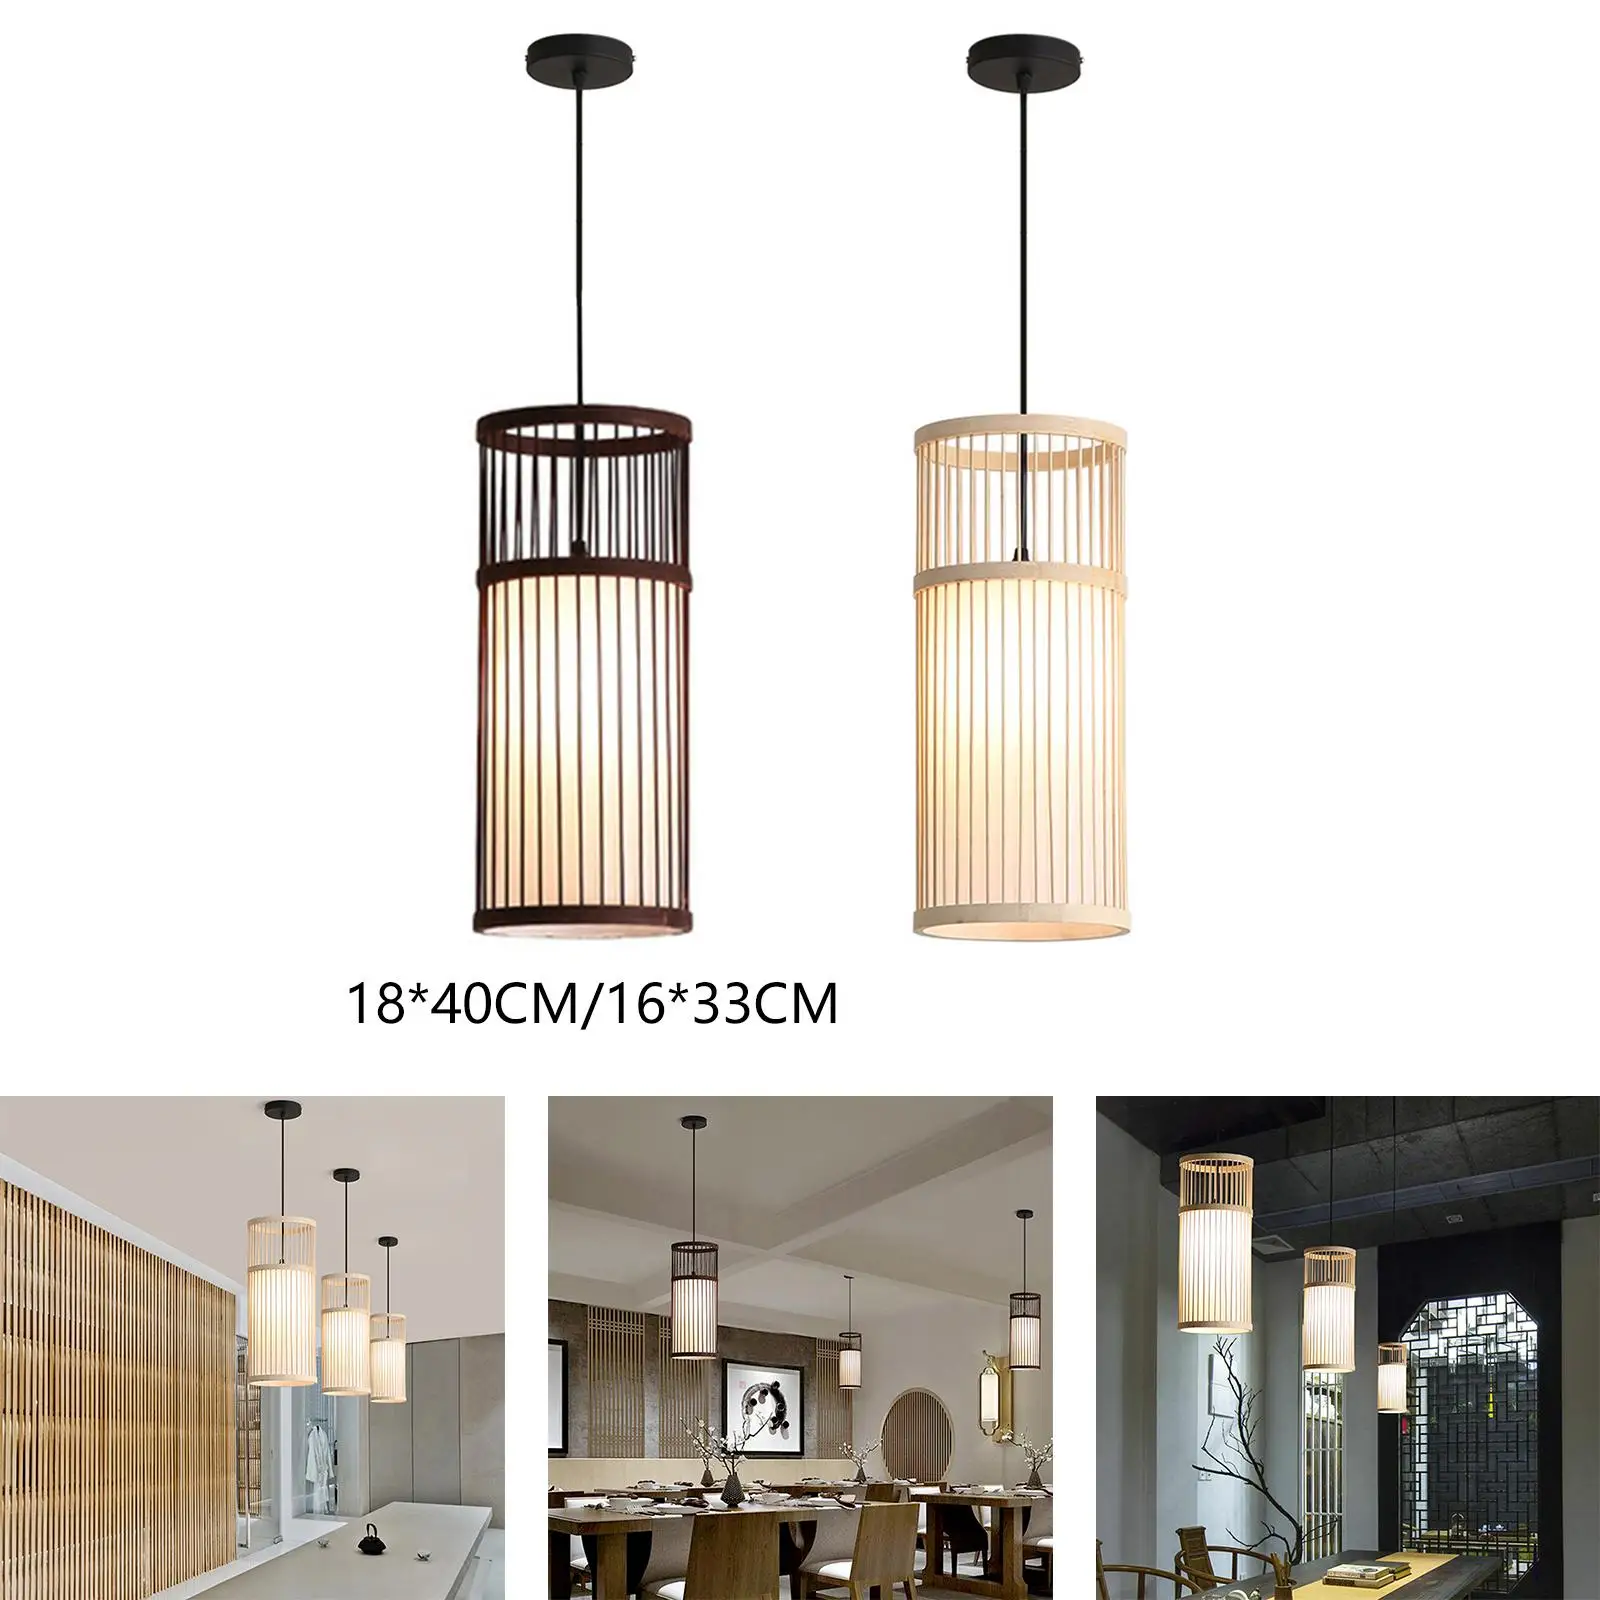 Bamboo Lamp Shade Ceiling Light Fixture Pendant Light Lampshade Rattan Classic Droplight Cover Bamboo Wicker for Home Teahouse